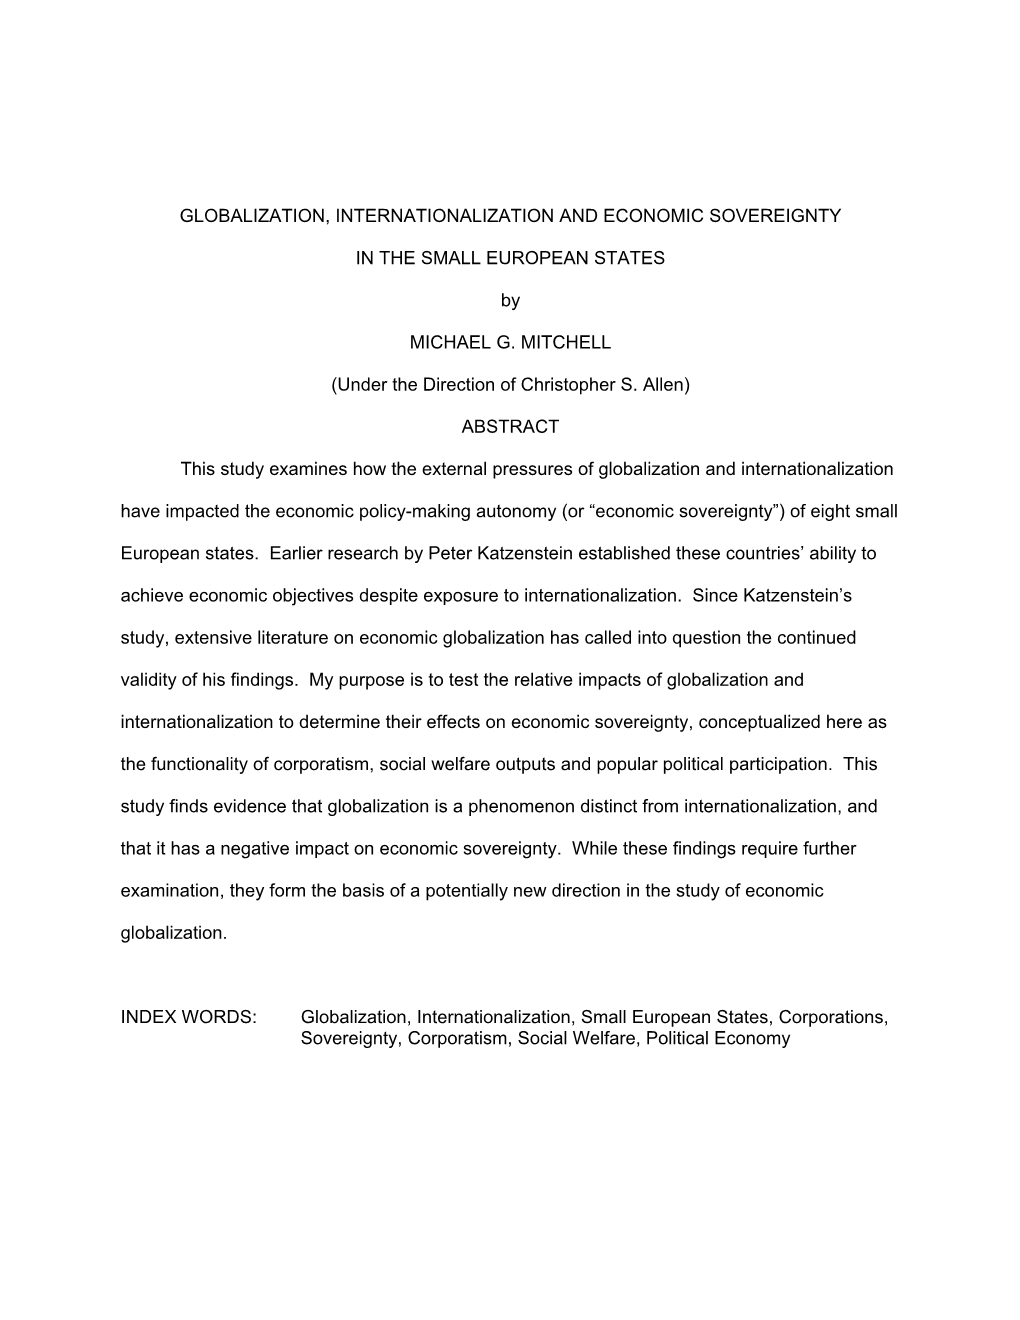 Global Corporations and Economic Sovereignty